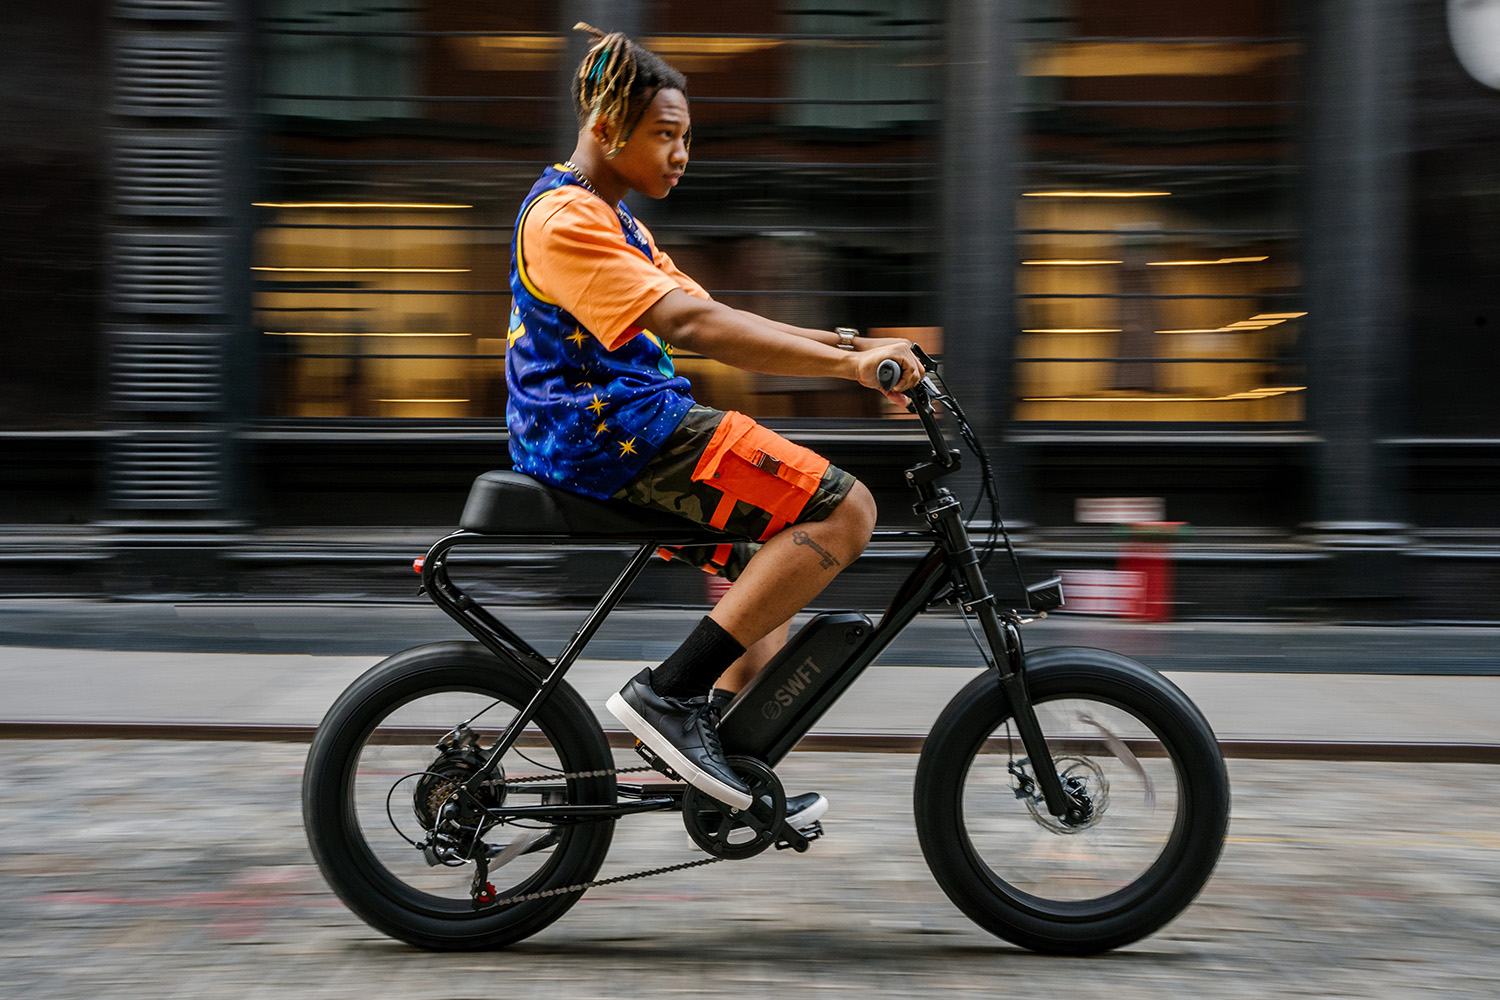 A man riding the Swft ebike